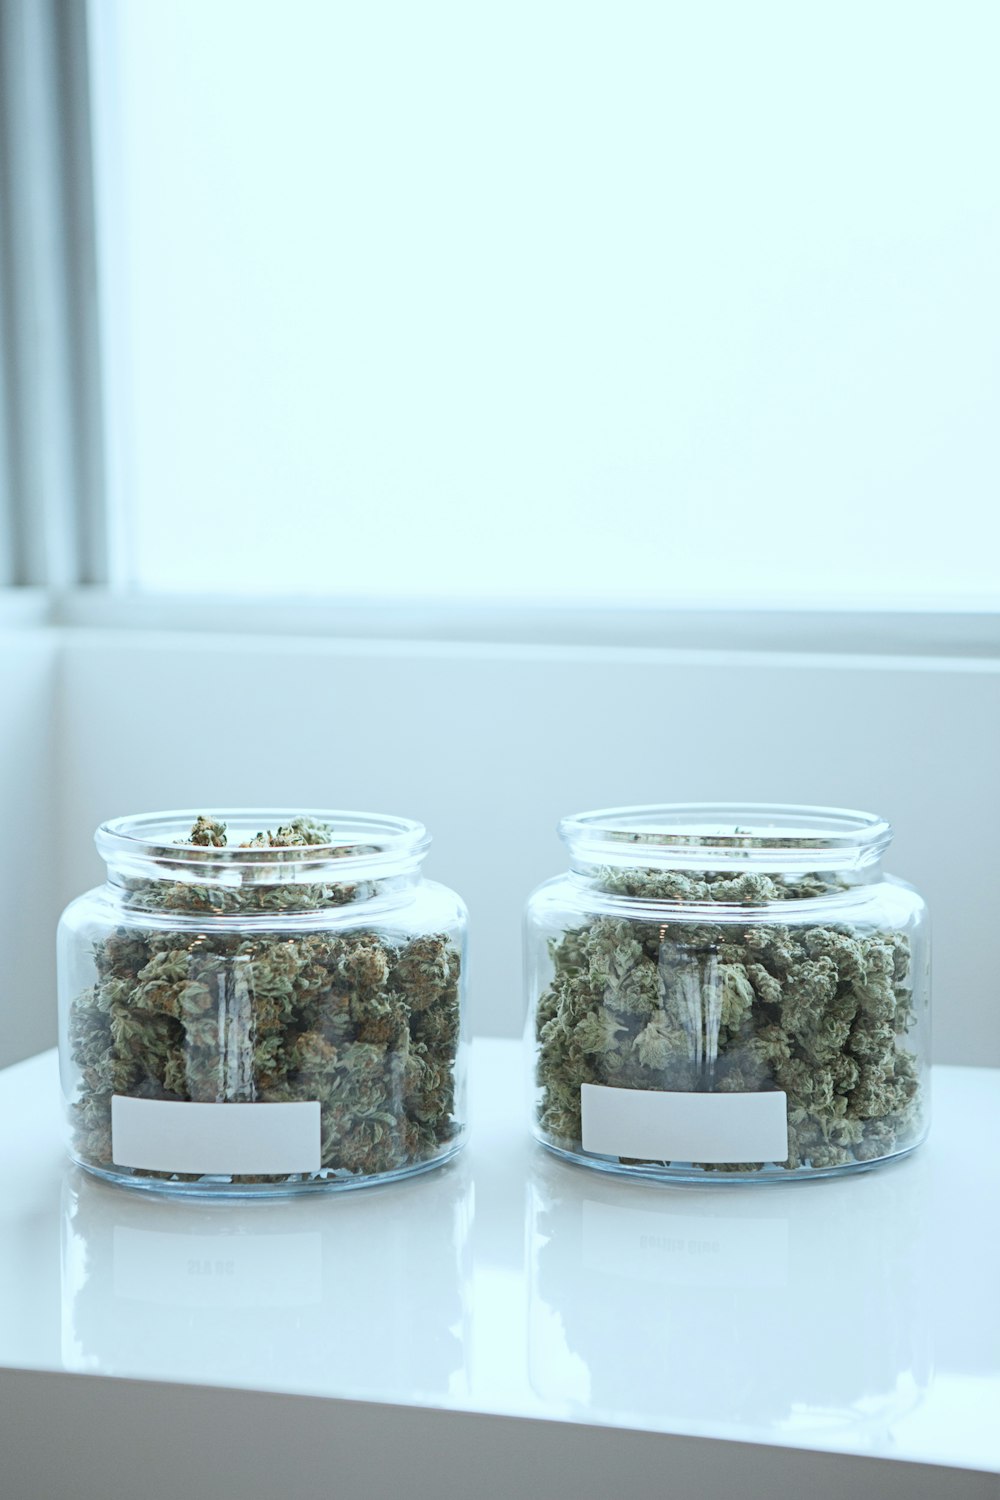 full of kush in clear glass jars on table